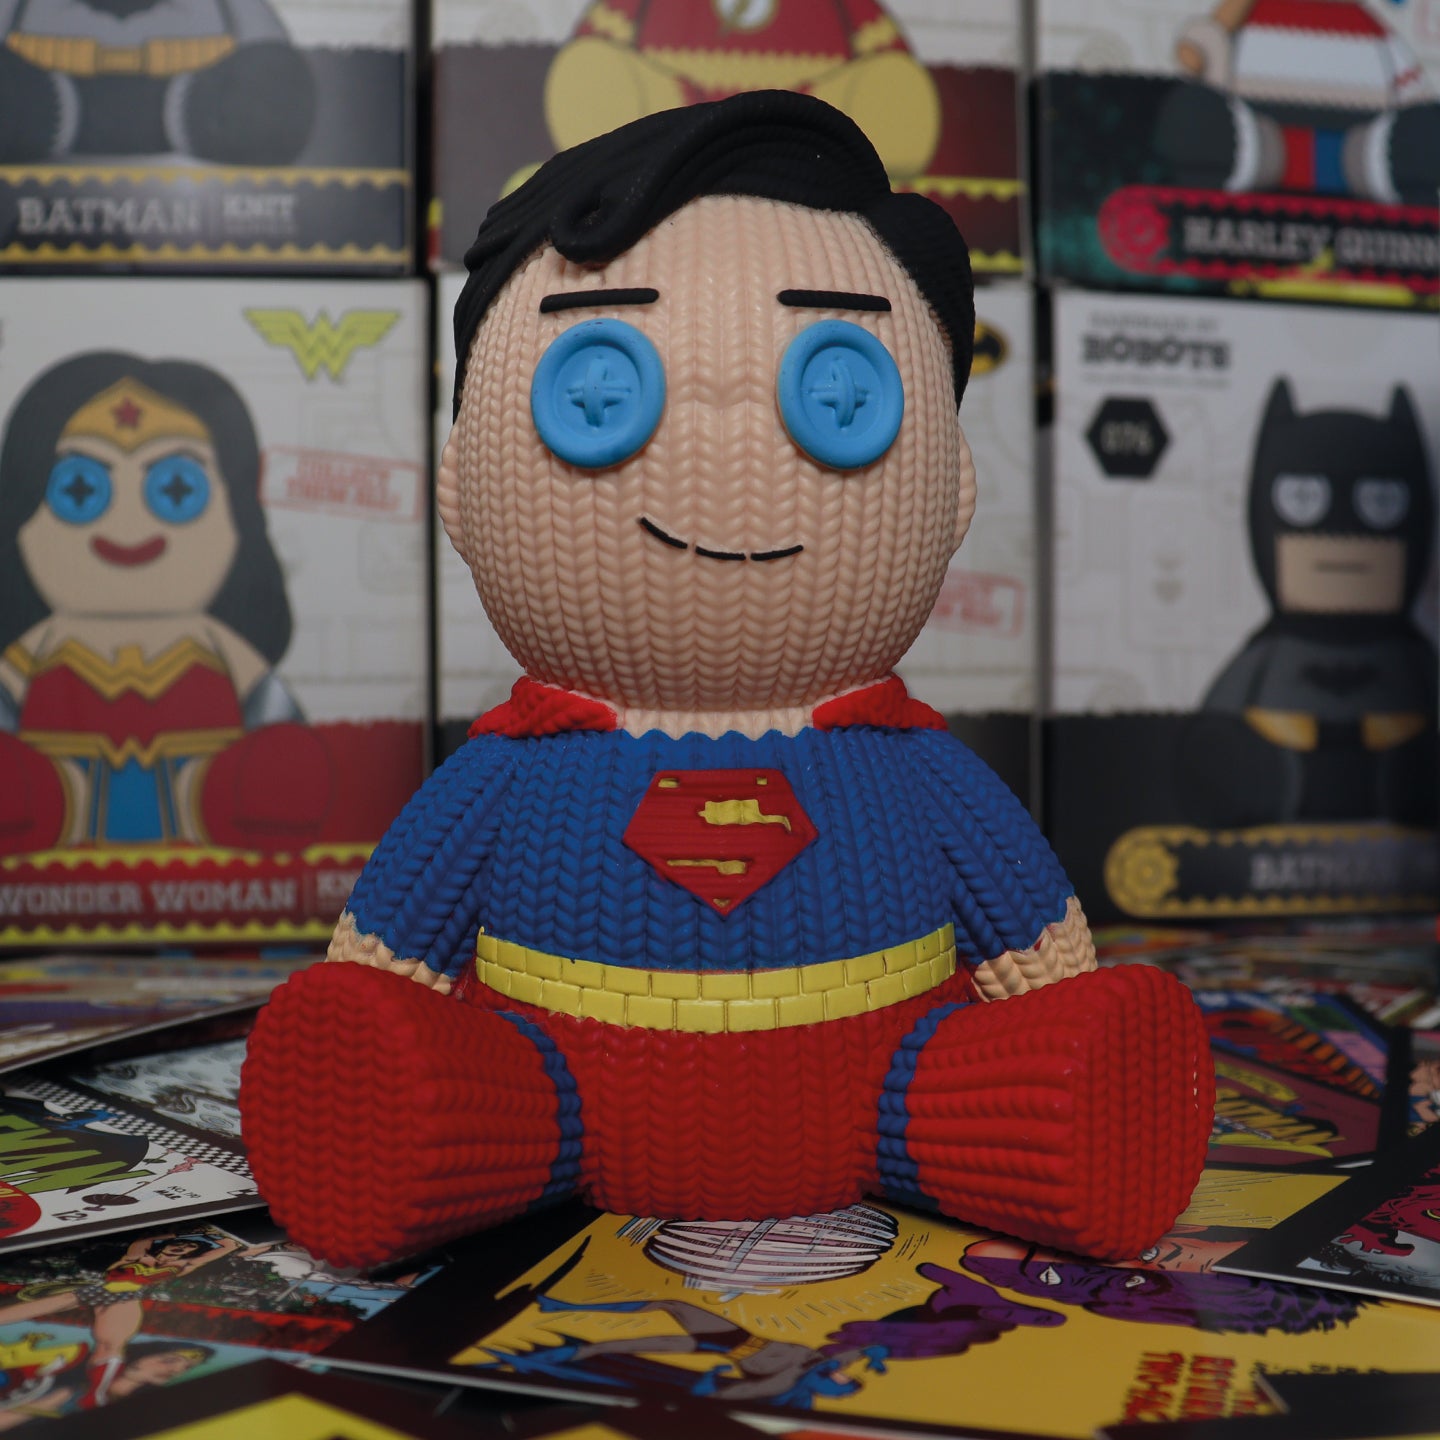 DC - Superman Collectible Vinyl Figure from Handmade By Robots